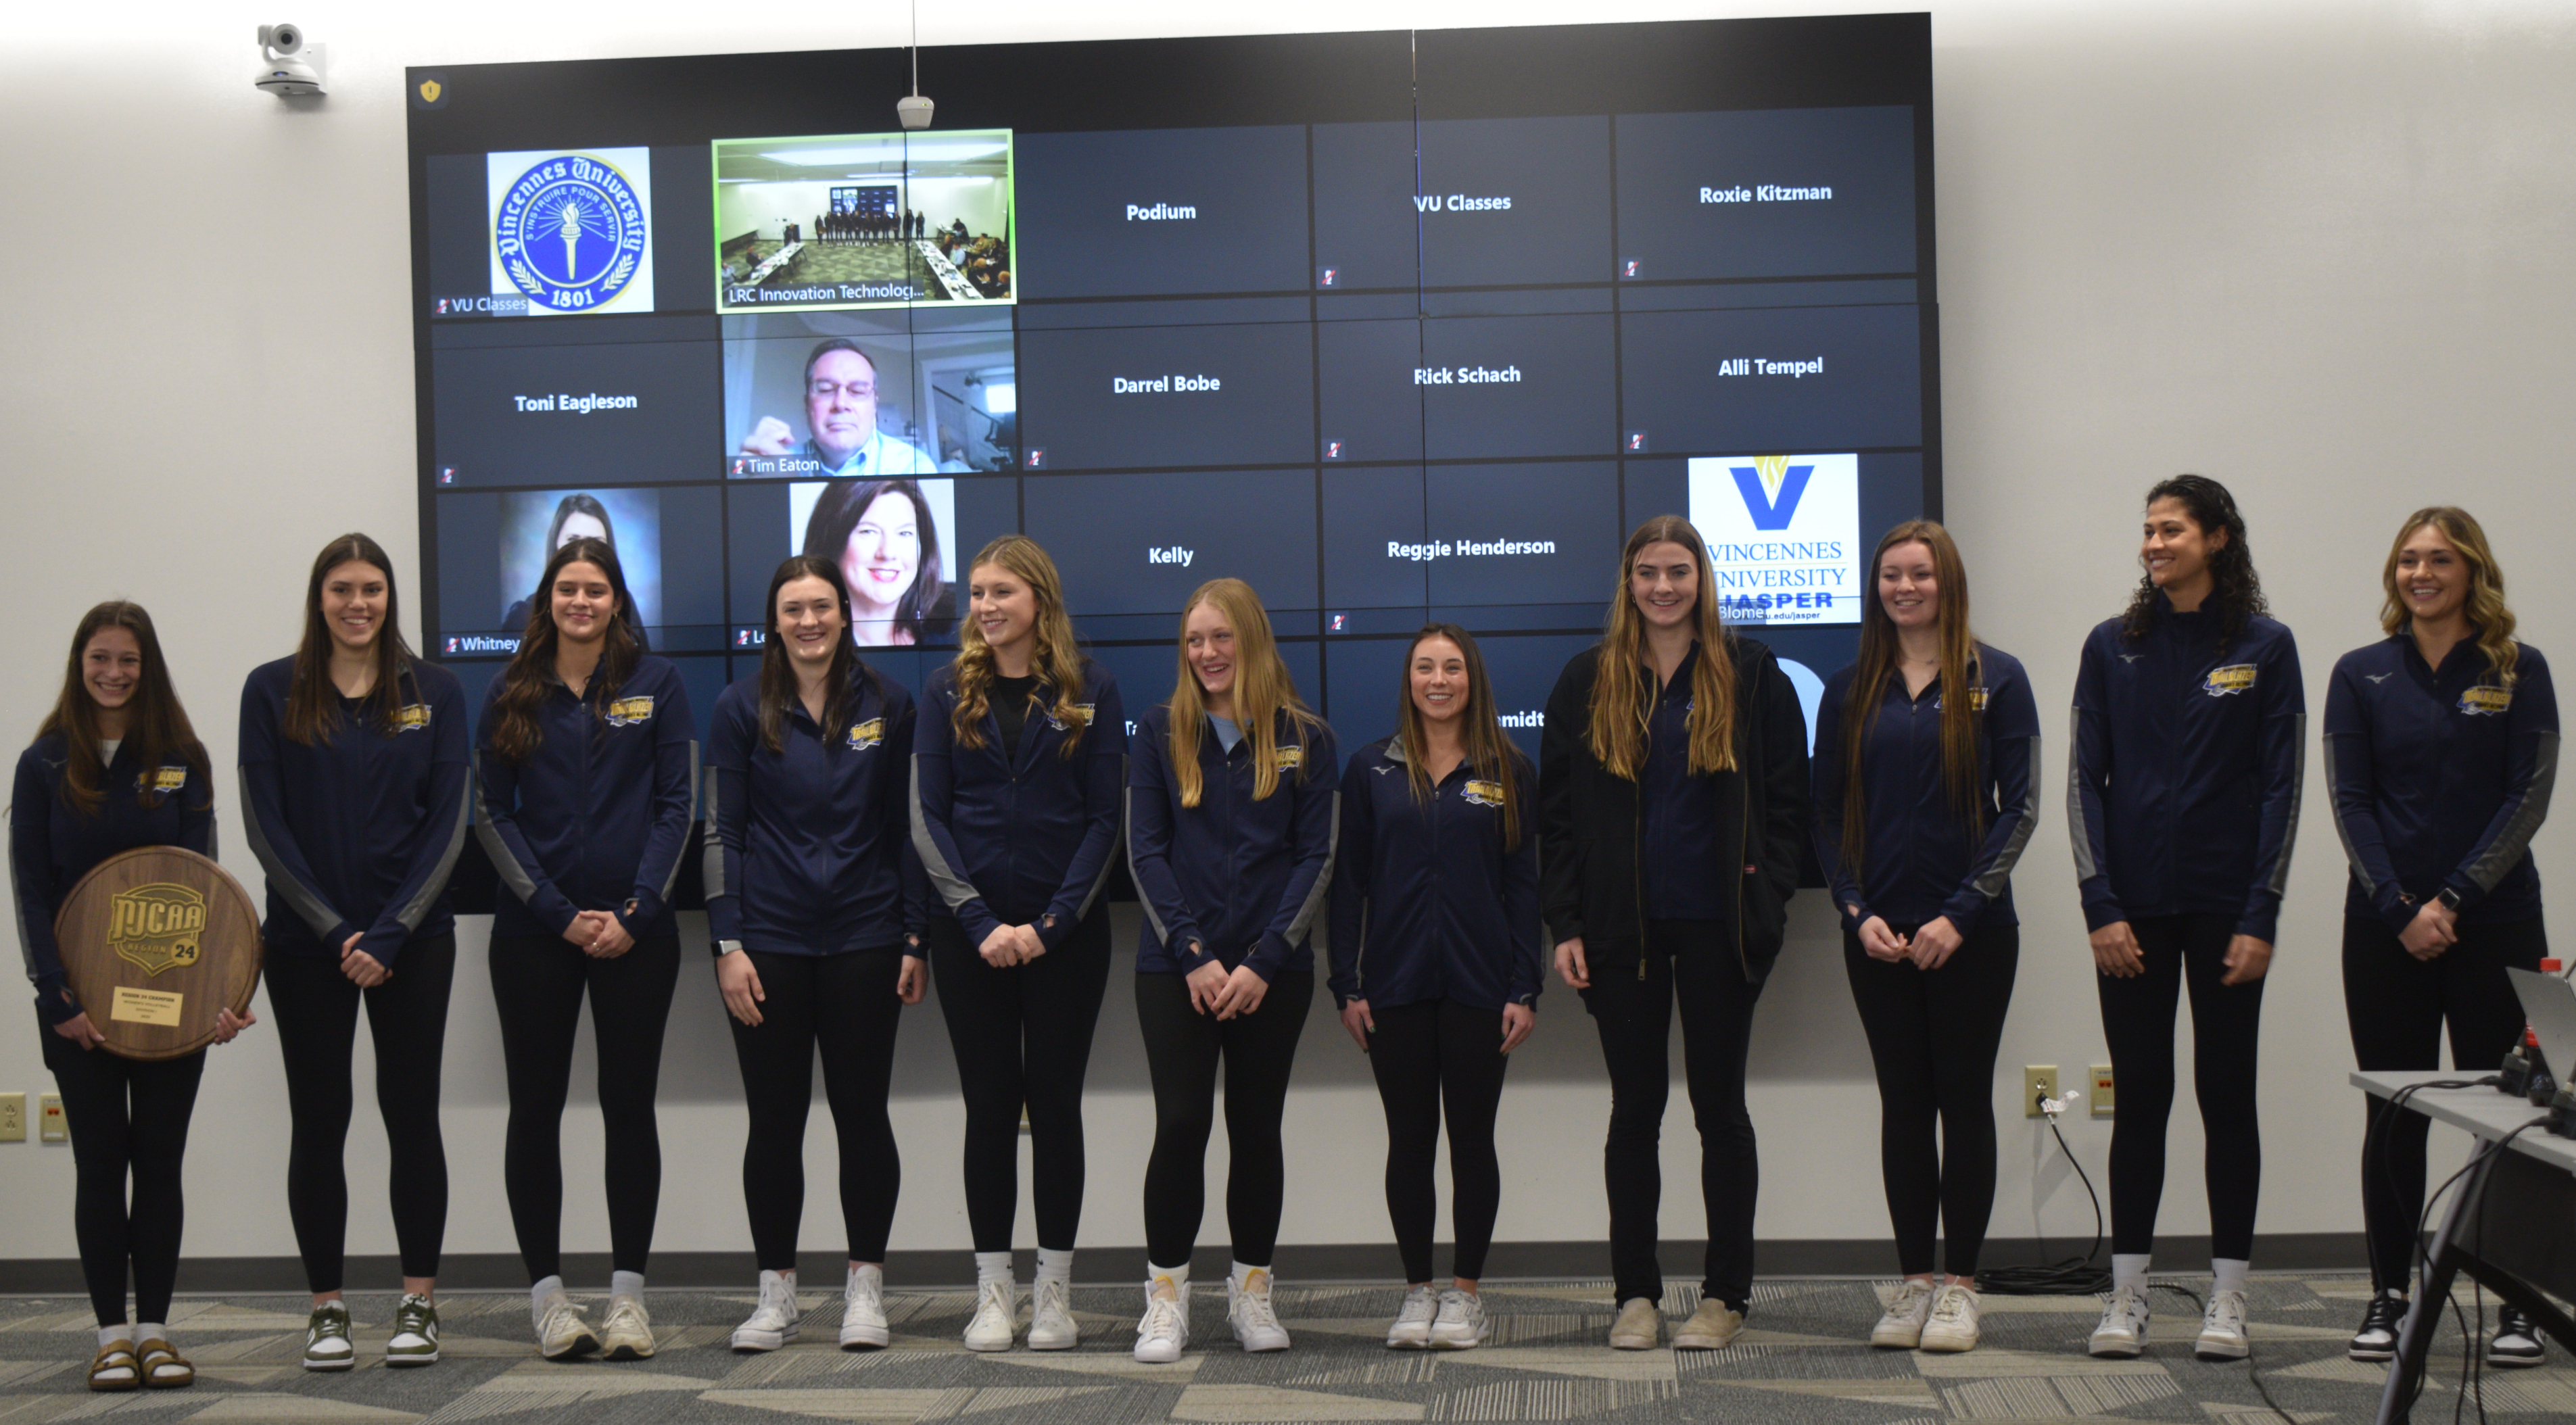 VU volleyball team stands in front of a large screen while one player holds a championship plaque.